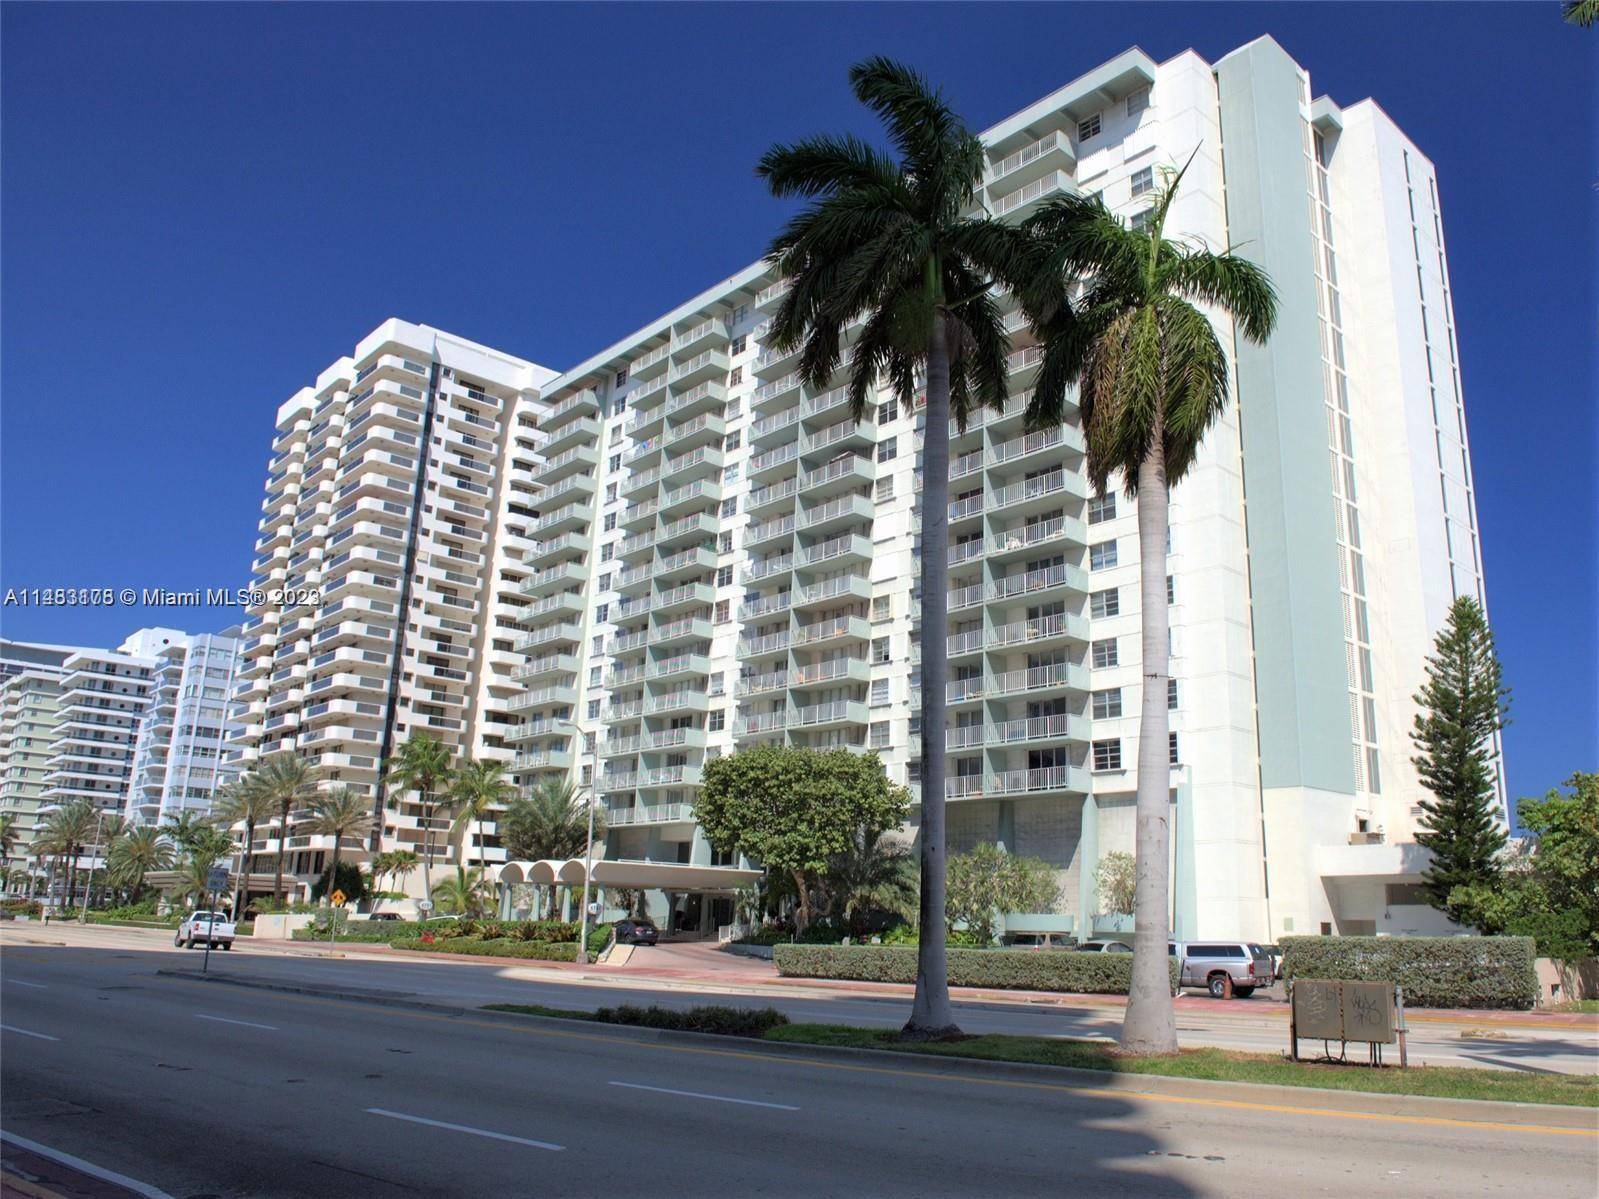 SEASONAL RENT ONLY FULLY FURNISHED BEAUTIFUL OCEAN FRONT CONDO WITH DIRECT INTERCOASTAL VIEWS IN THE HEART OF MILLIONAIRES ROW.